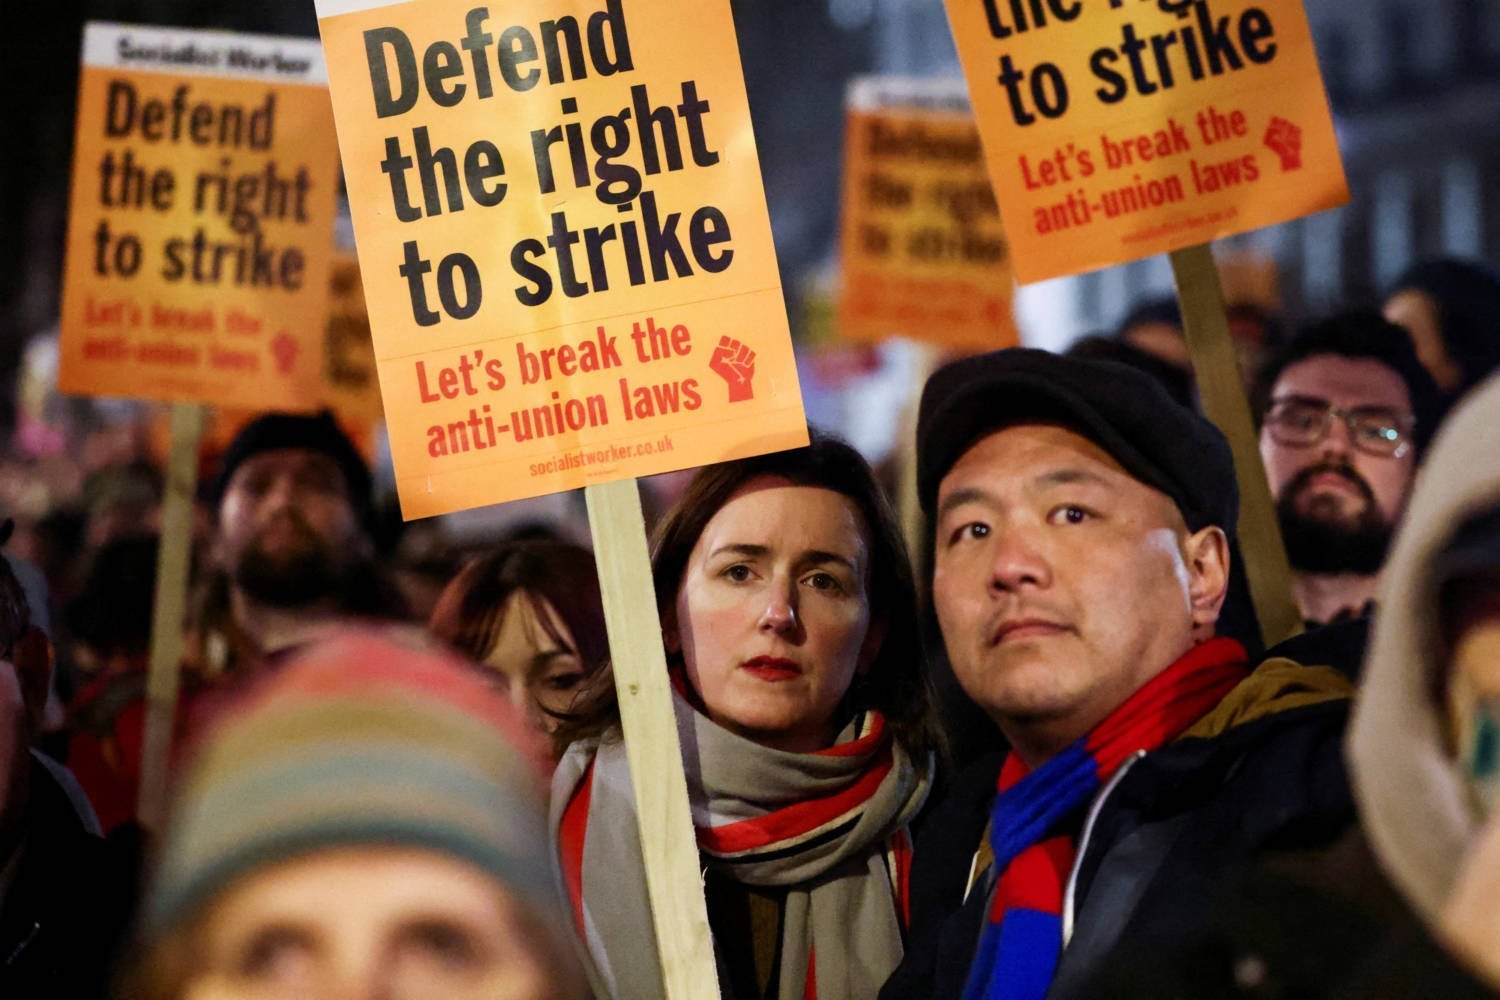 File Photo: Trade Unions Protest Outside London's Downing Street For The Right To Strike